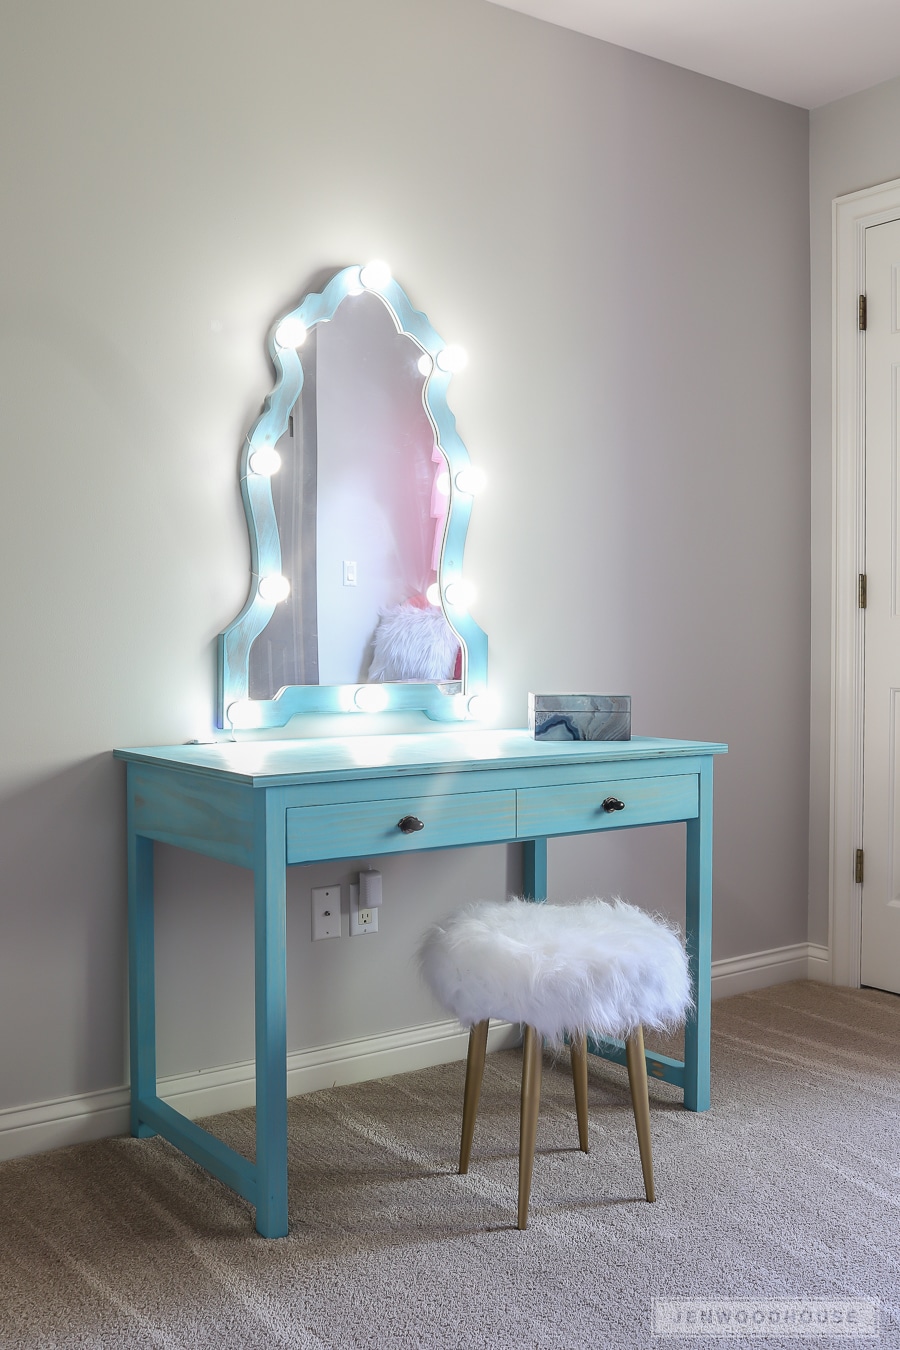 How To Make A Diy Makeup Vanity With, How To Build Your Own Hollywood Vanity Mirror